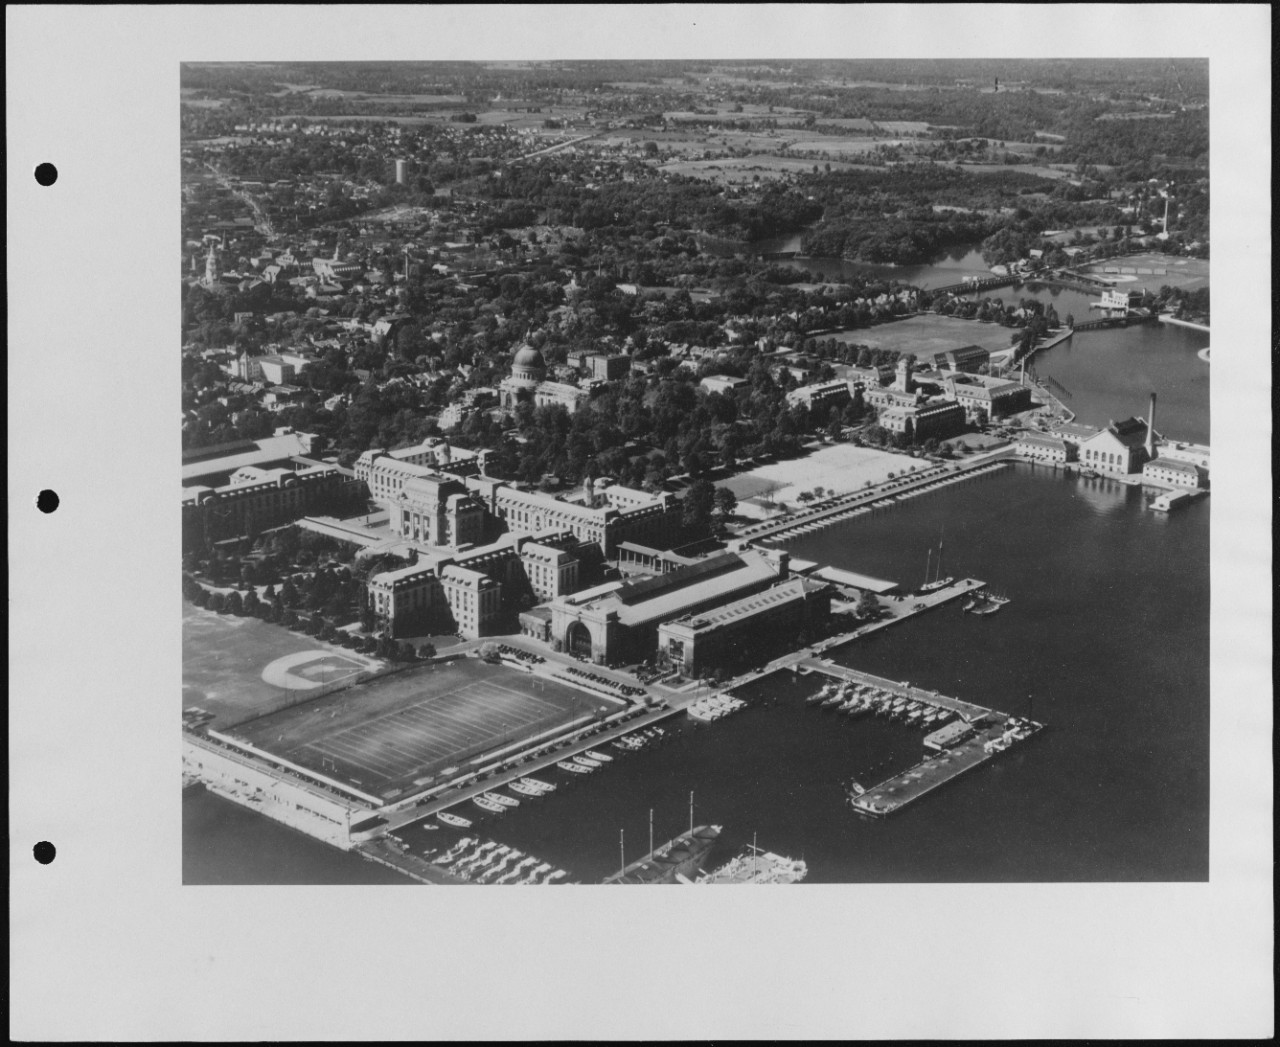 Aerial view of U.S. Naval Air Station, Anacostia, Washington, D.C. Naval Academy looking Southwest